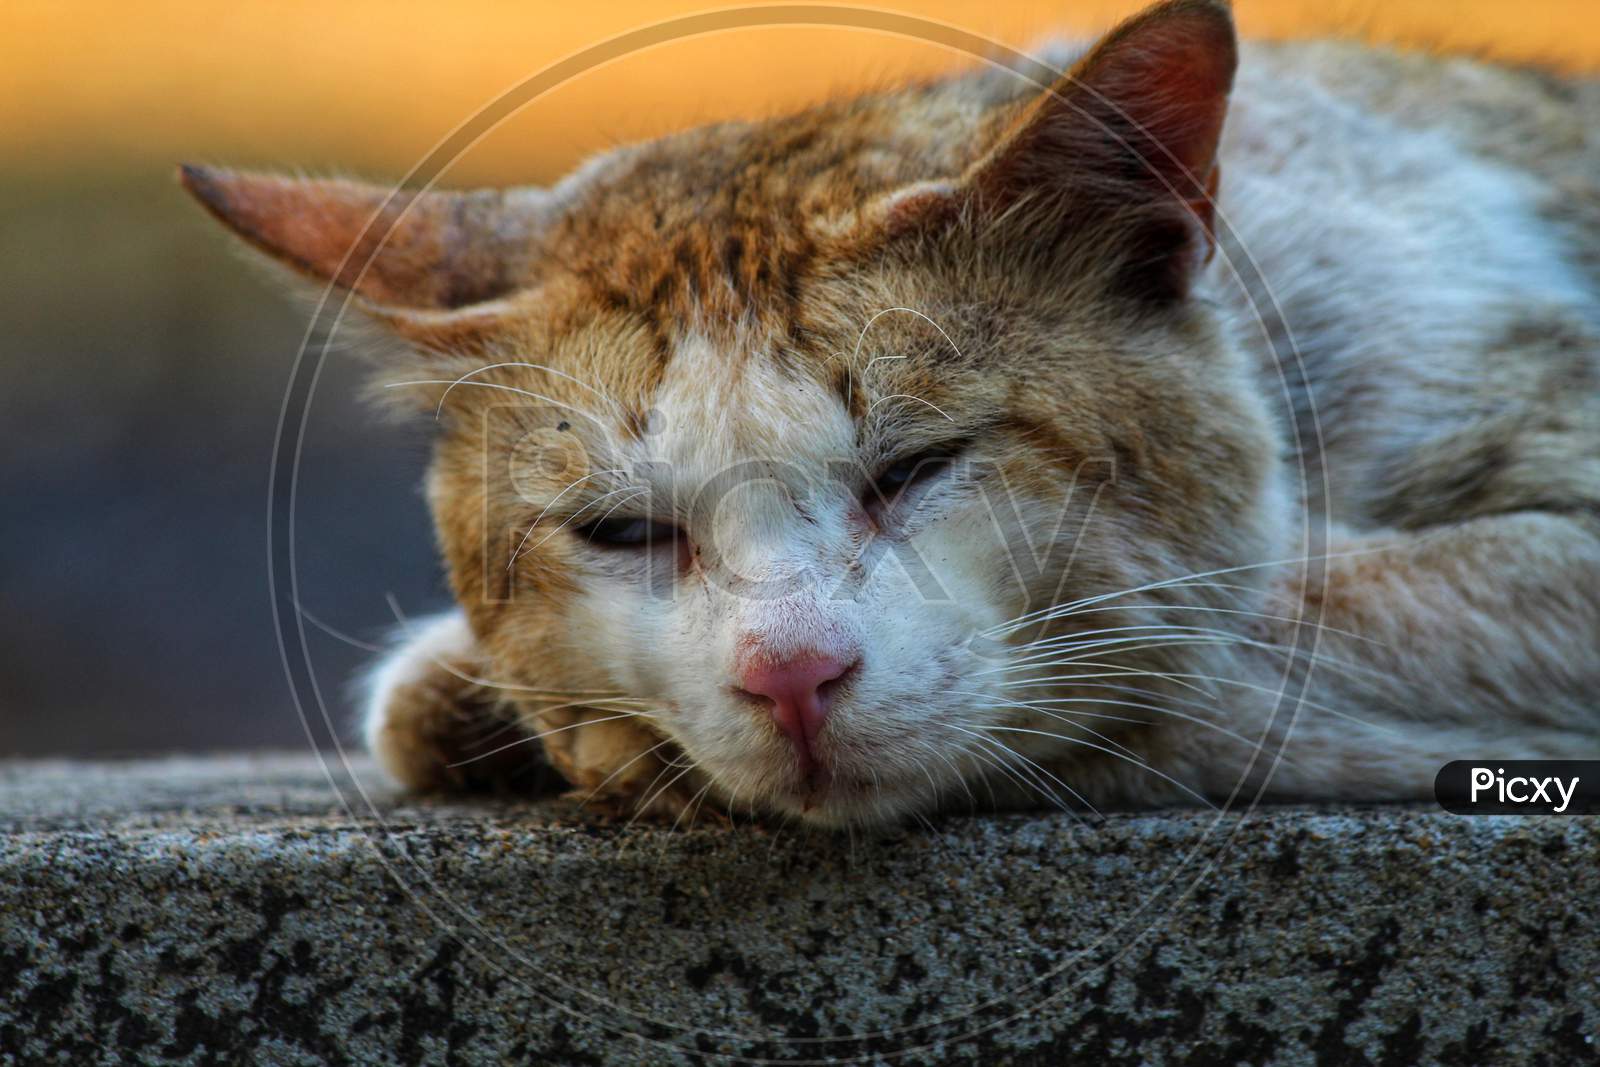 Close Up Picture Of A Cat Taking A Rest, Sleeping